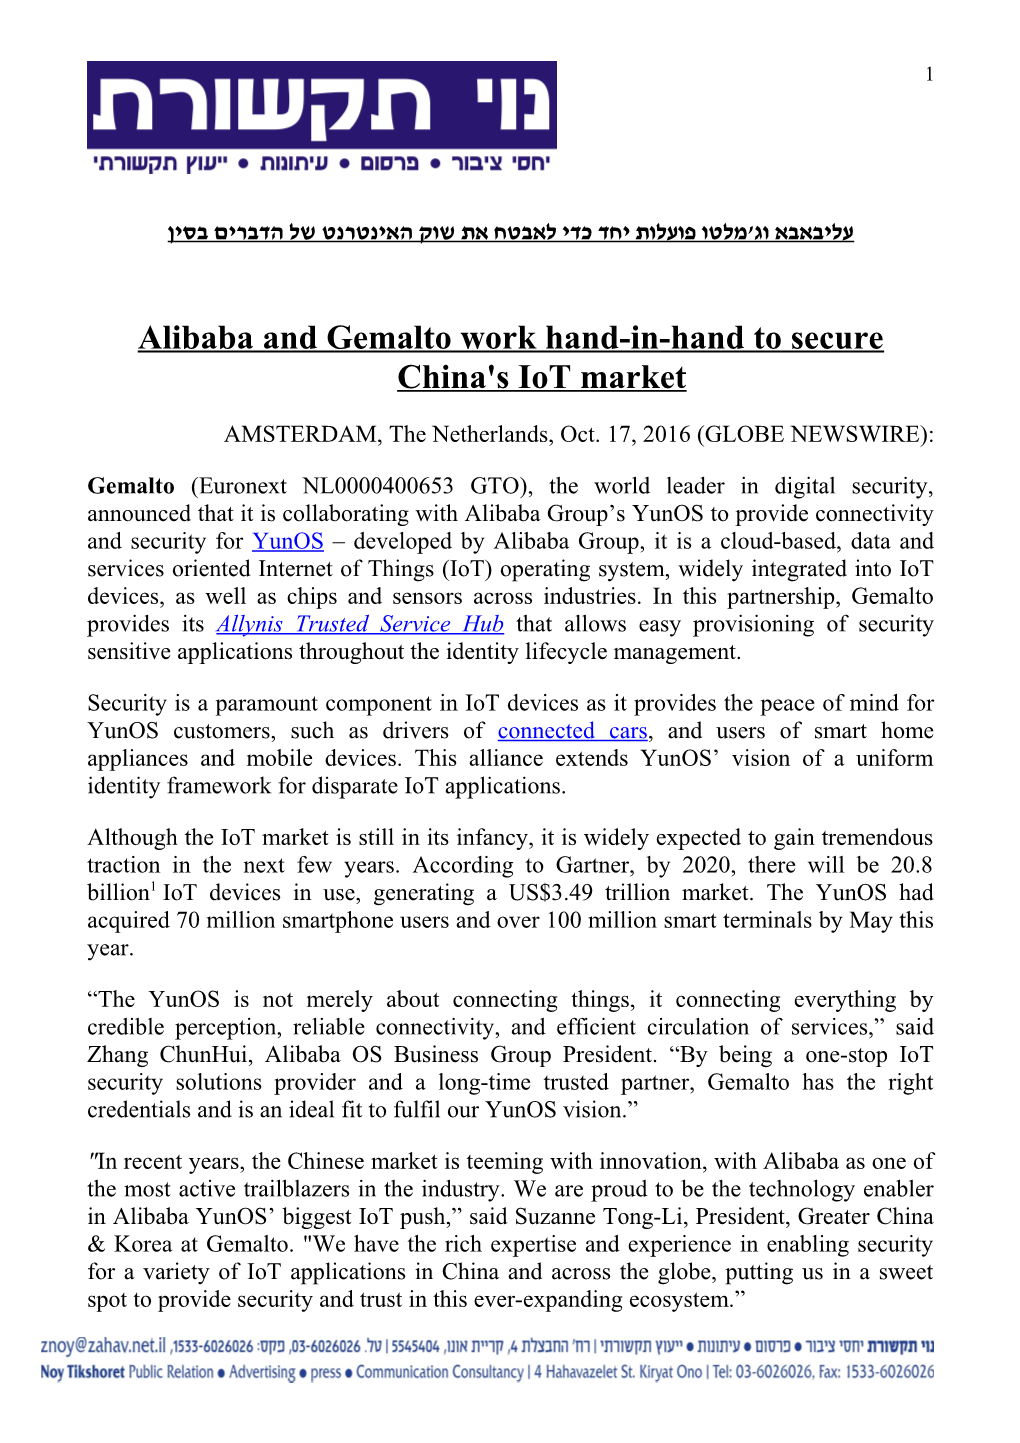 Alibaba and Gemalto Work Hand-In-Hand to Secure China's Iot Market